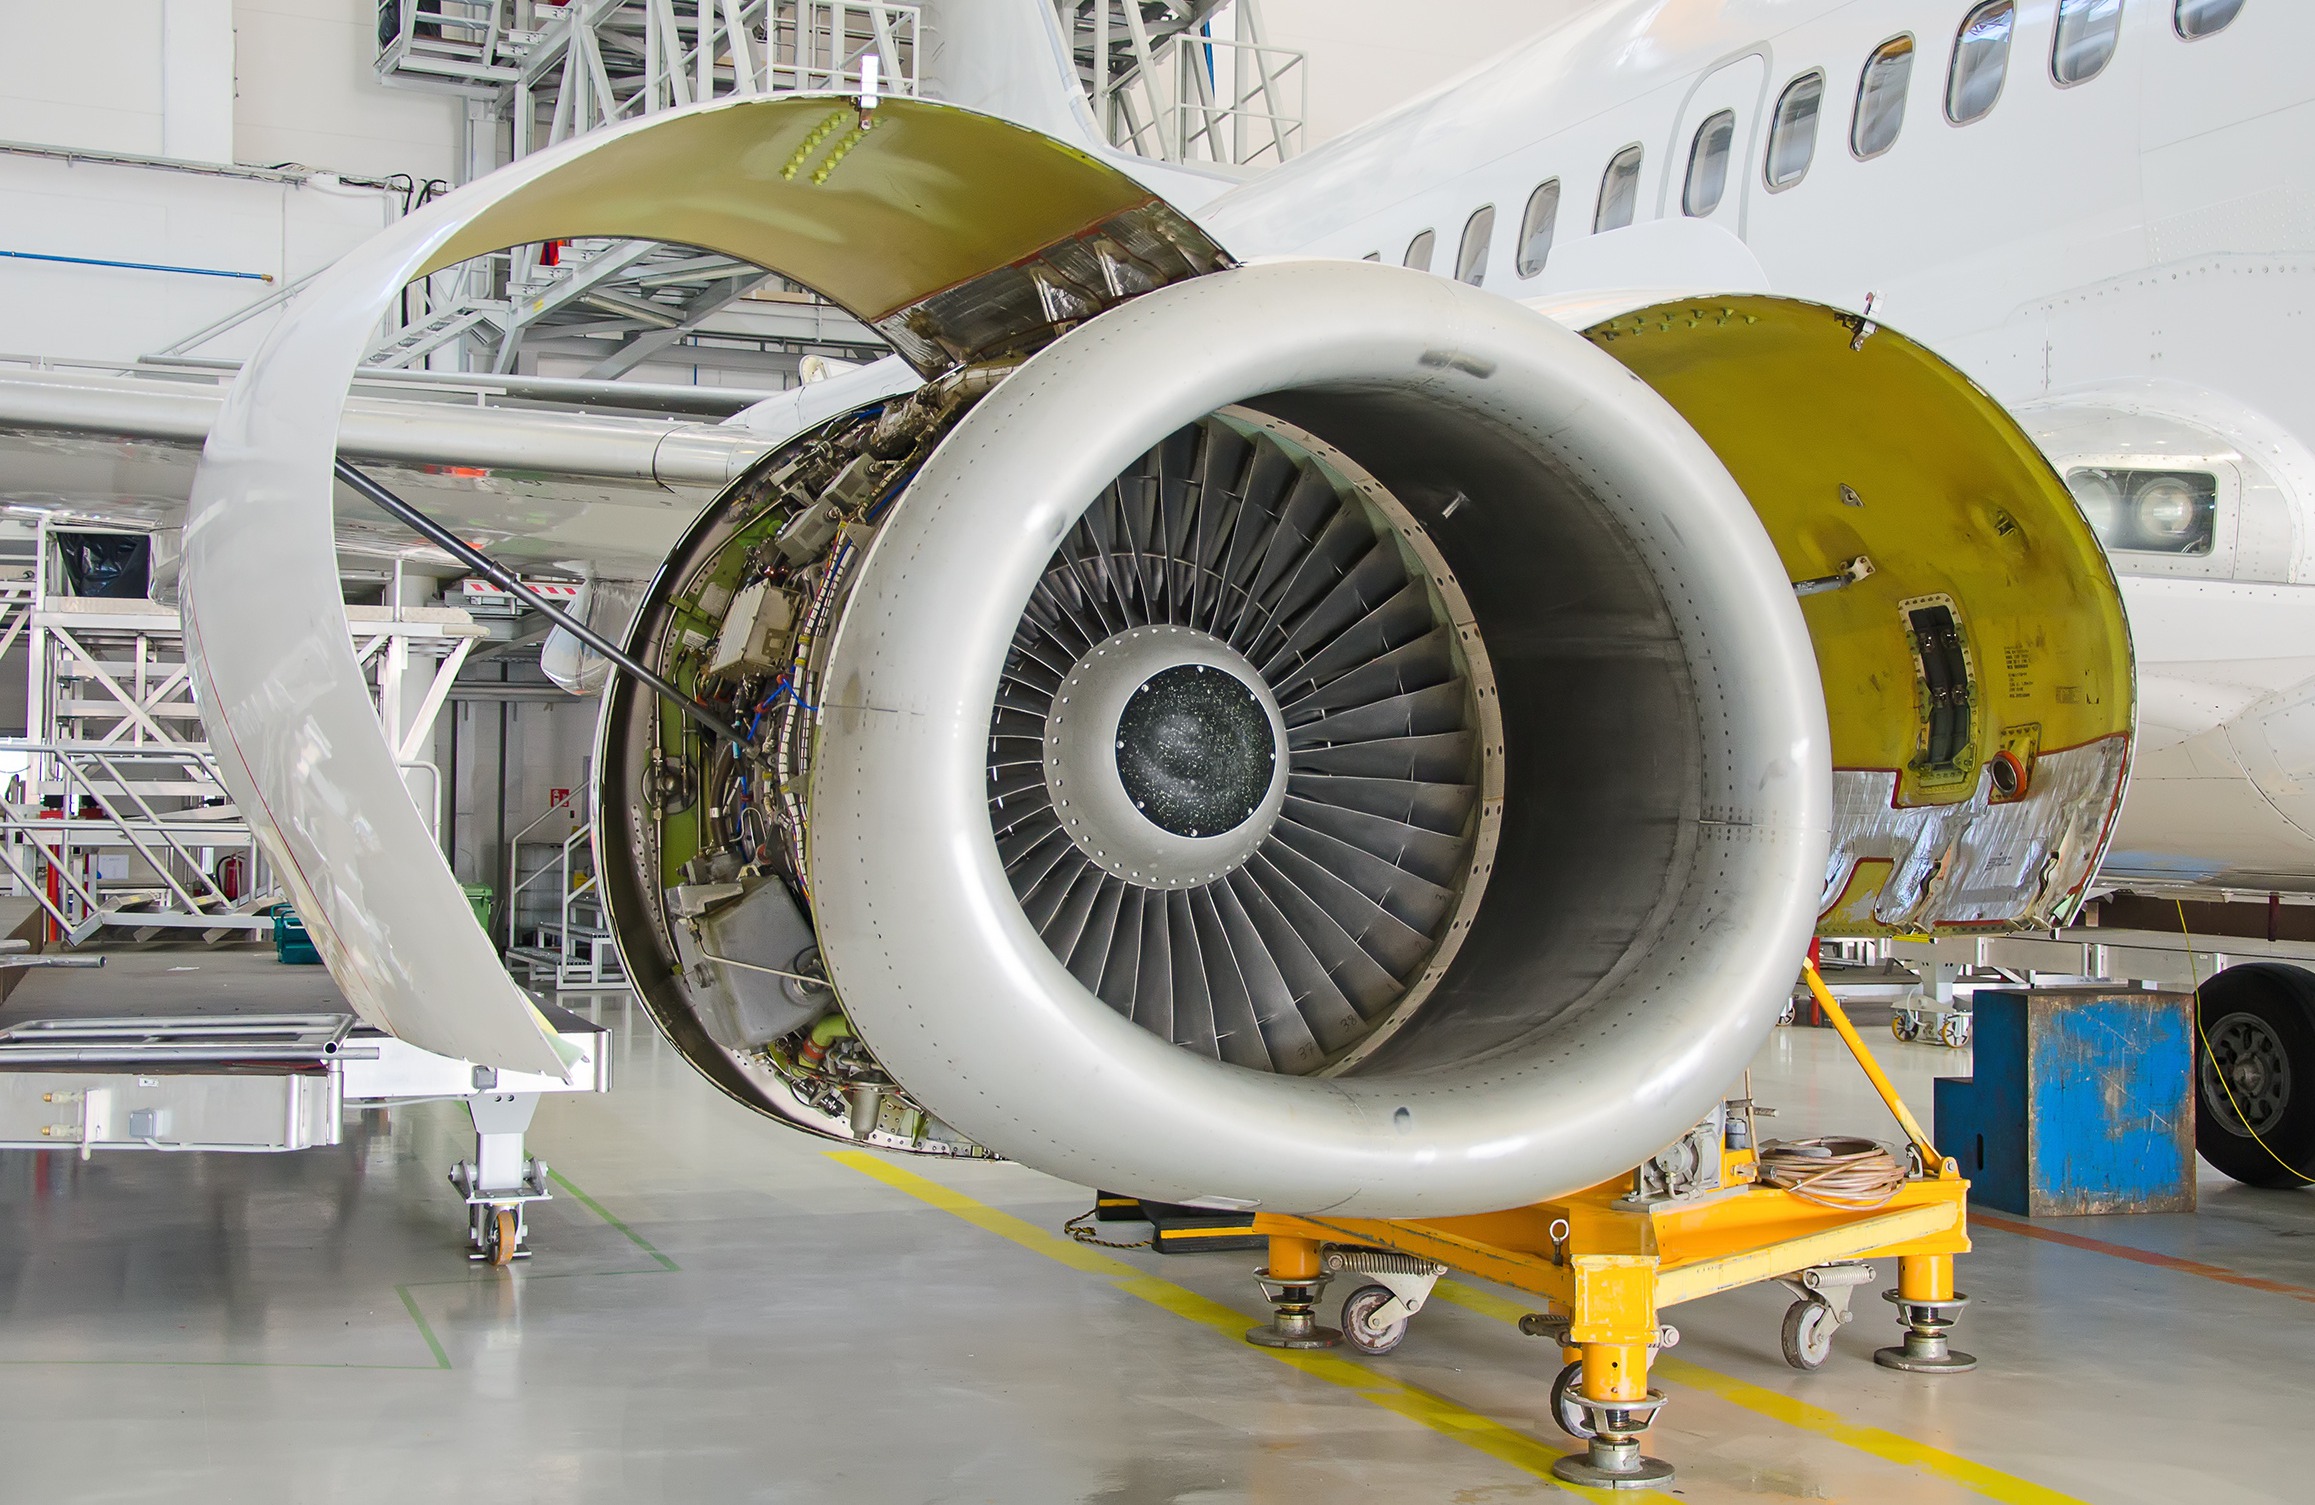 Aircraft Fall Prevention: 4 Compliance Challenges And 3 Safety Solutions